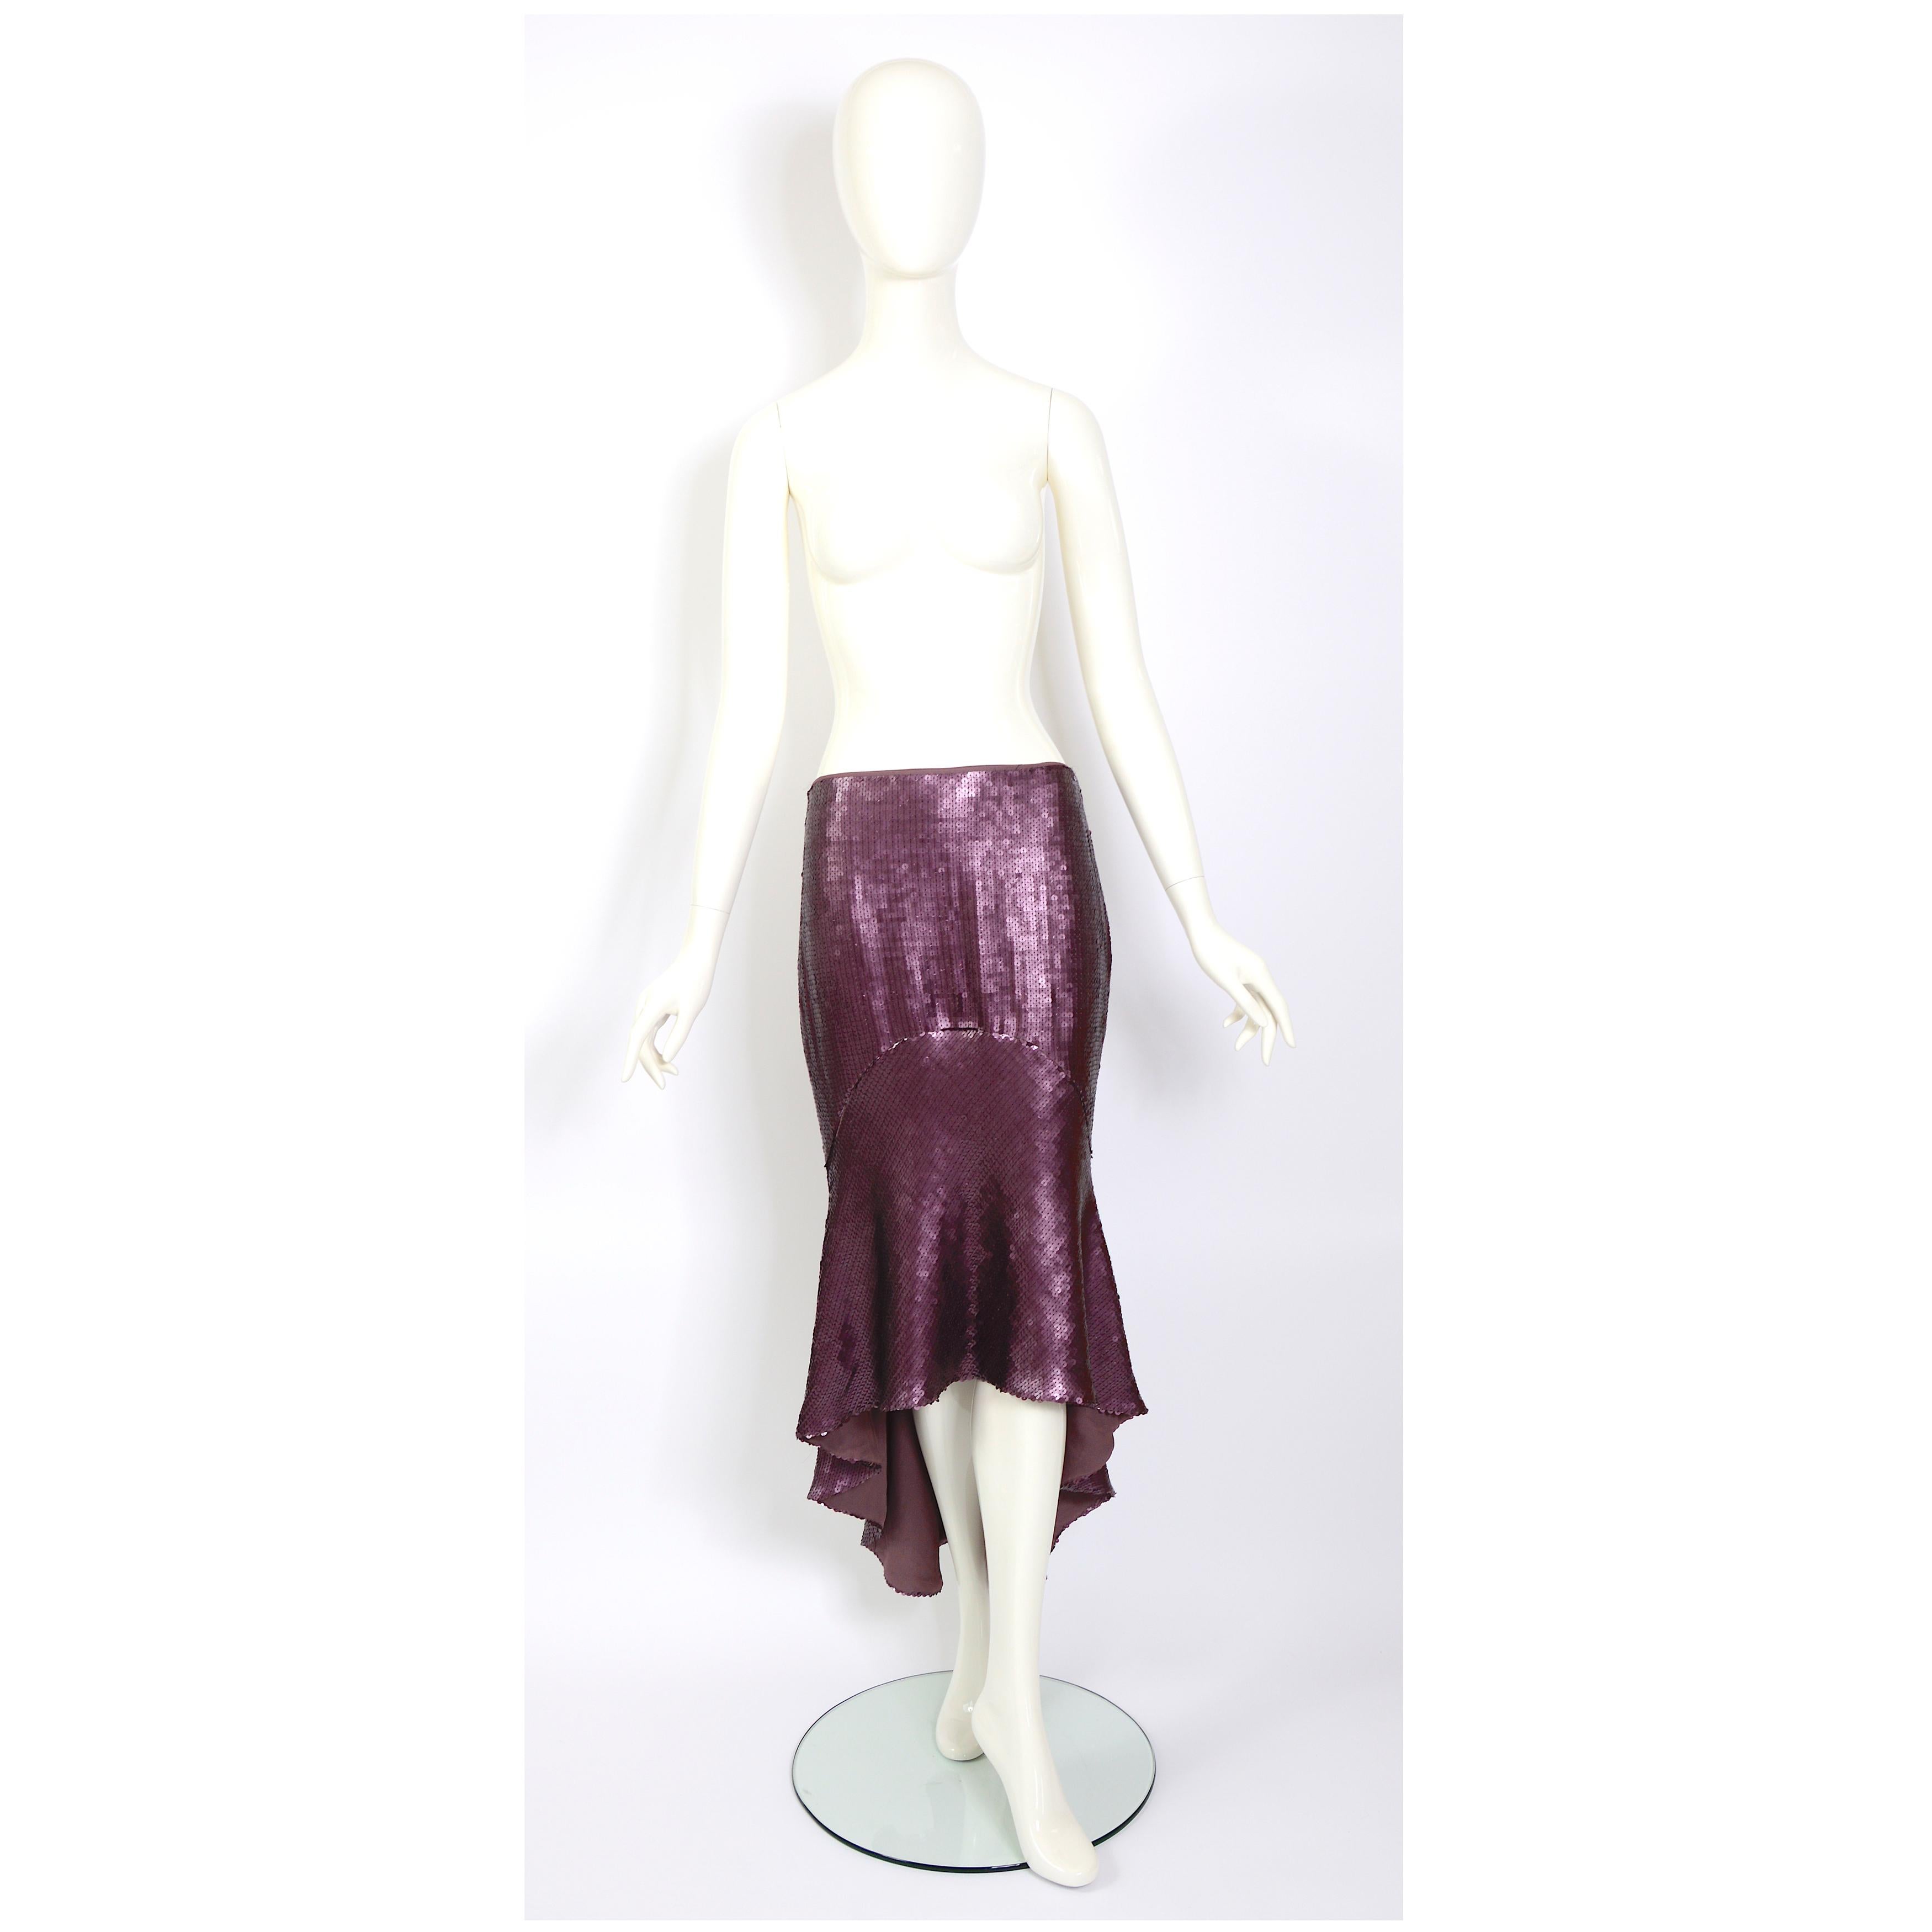 Chloé by Stella McCartney runway 1999 vintage sequin fishtail style skirt  For Sale 6